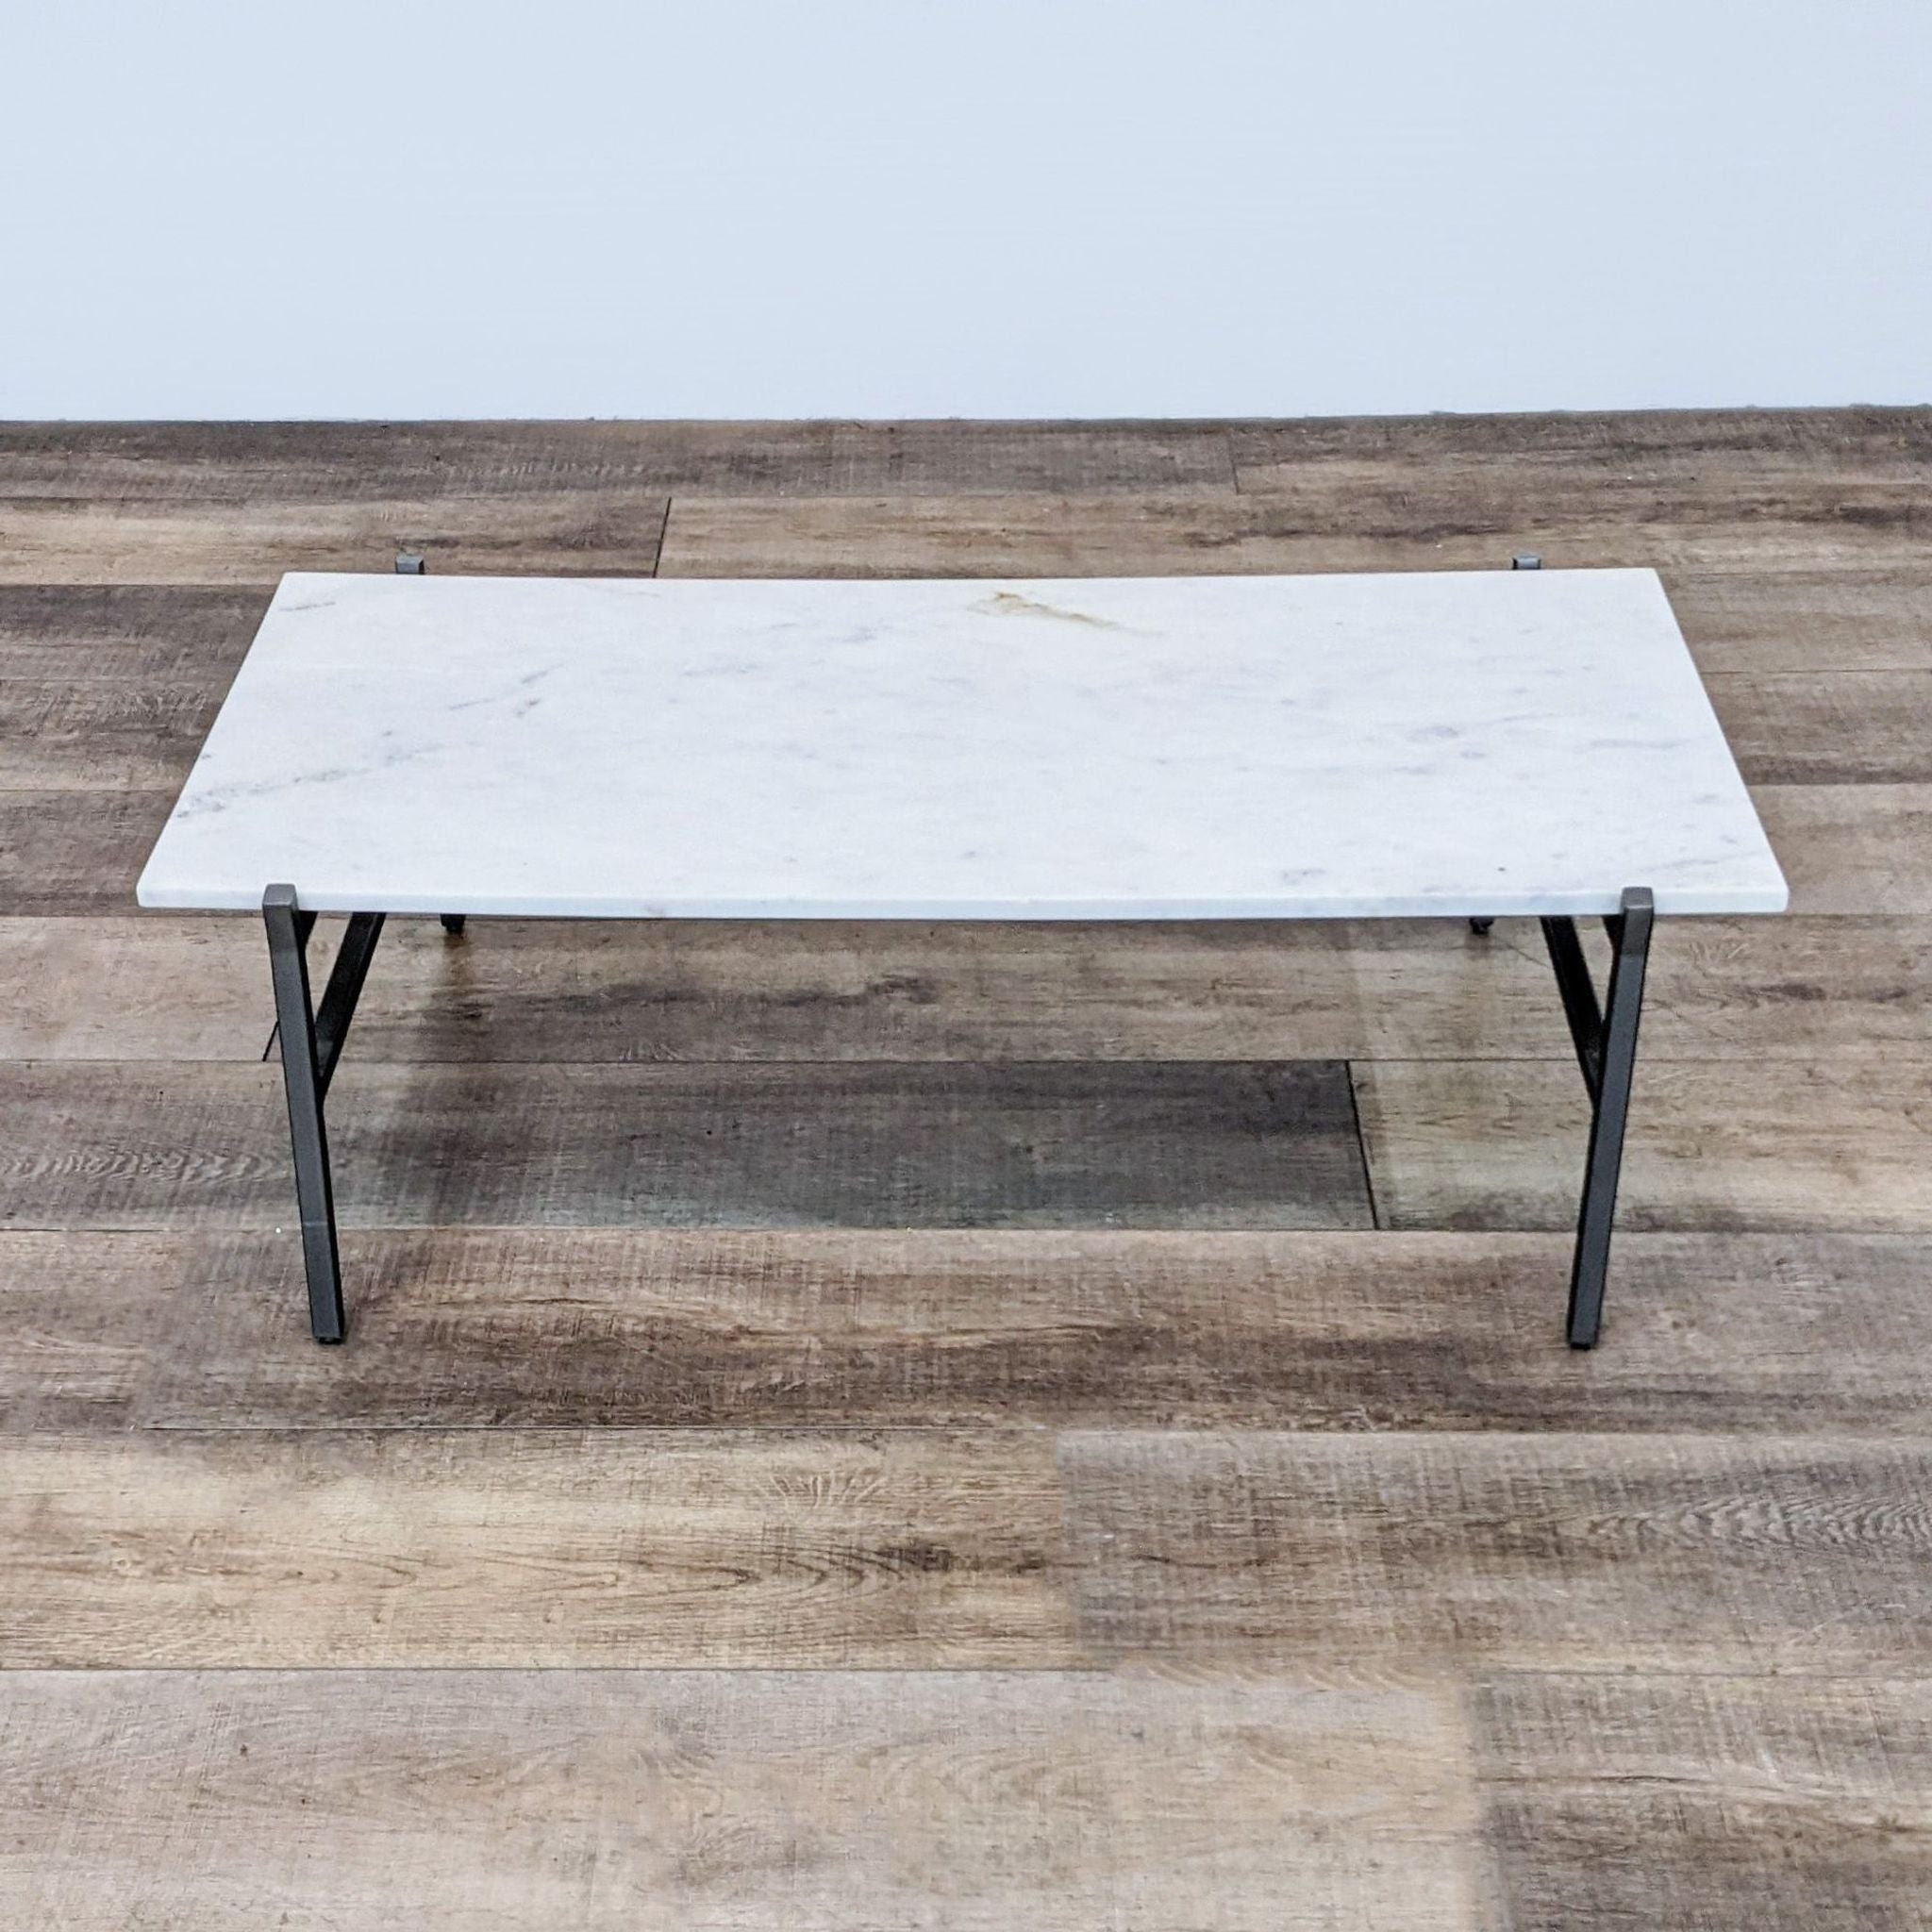 CB2 brand coffee table with a marble slab top and minimalist steel base on a wooden floor.